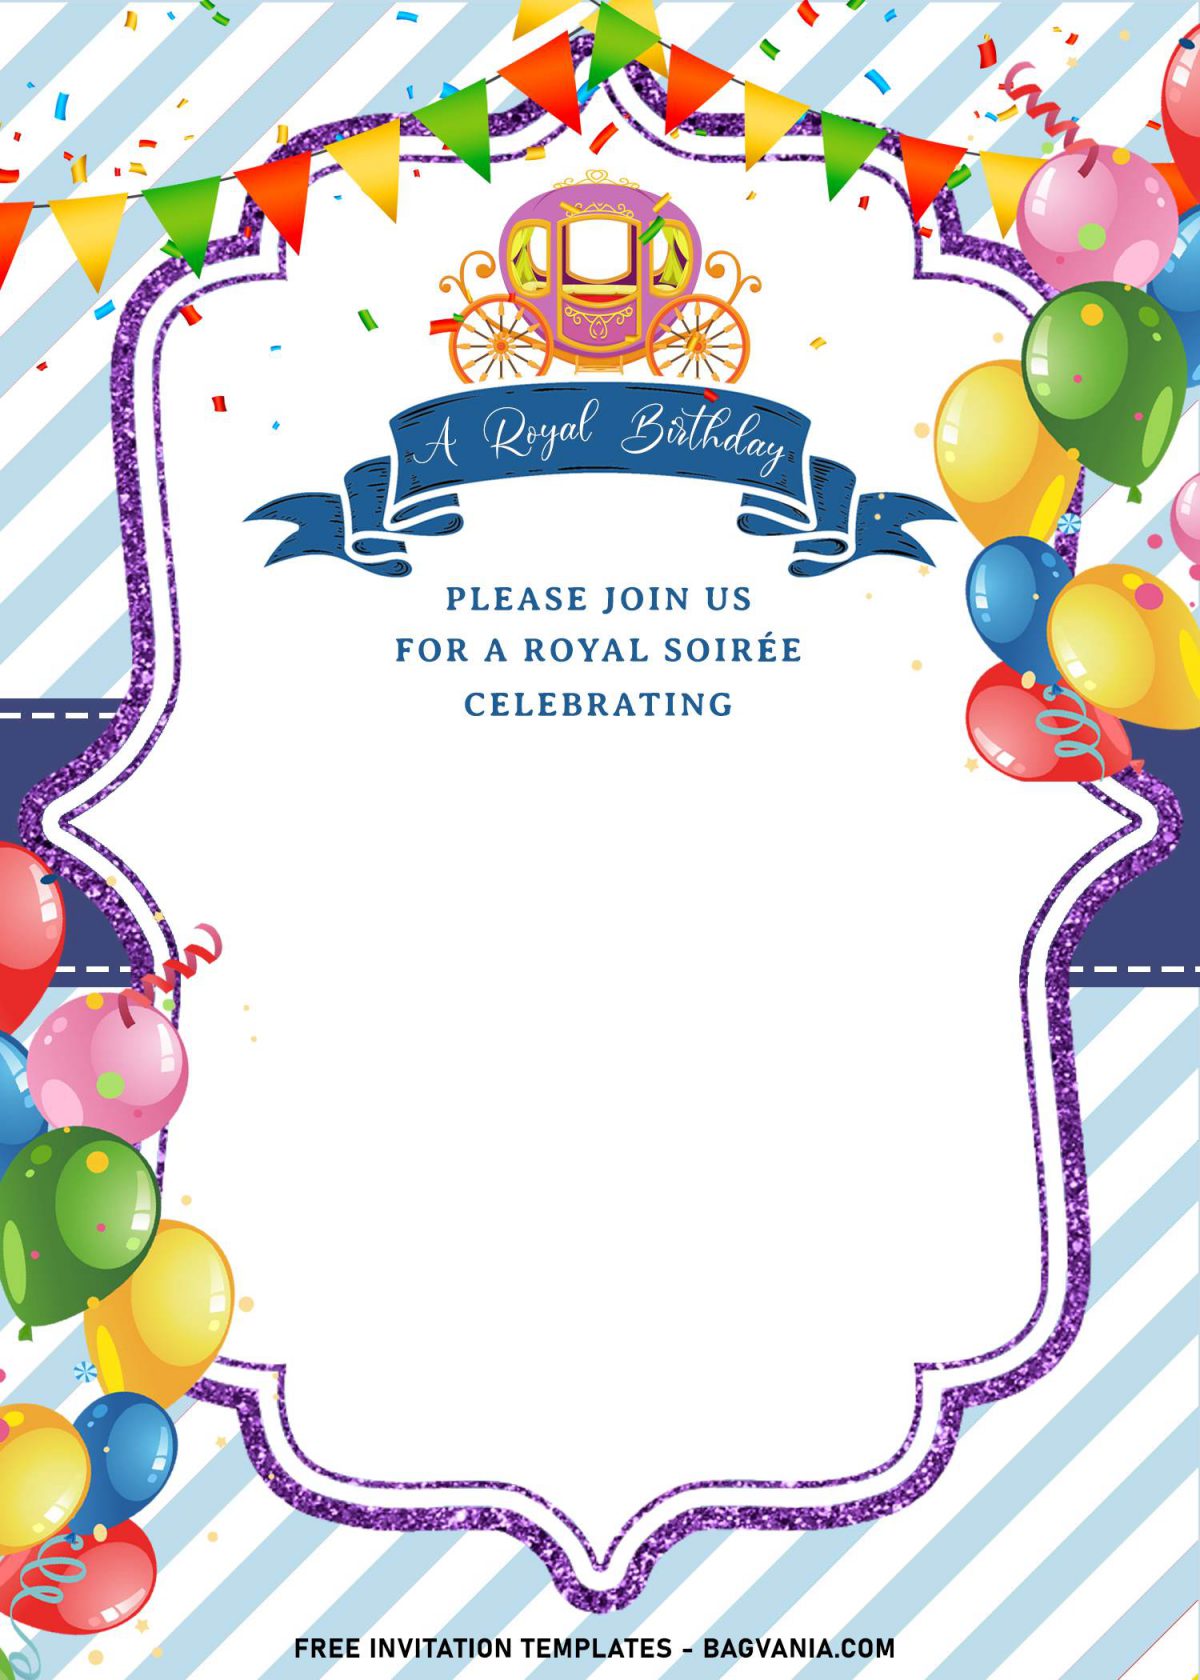 8+ Royal Birthday Invitation Templates For Your Kids Upcoming Birthday Party and has colorful balloons